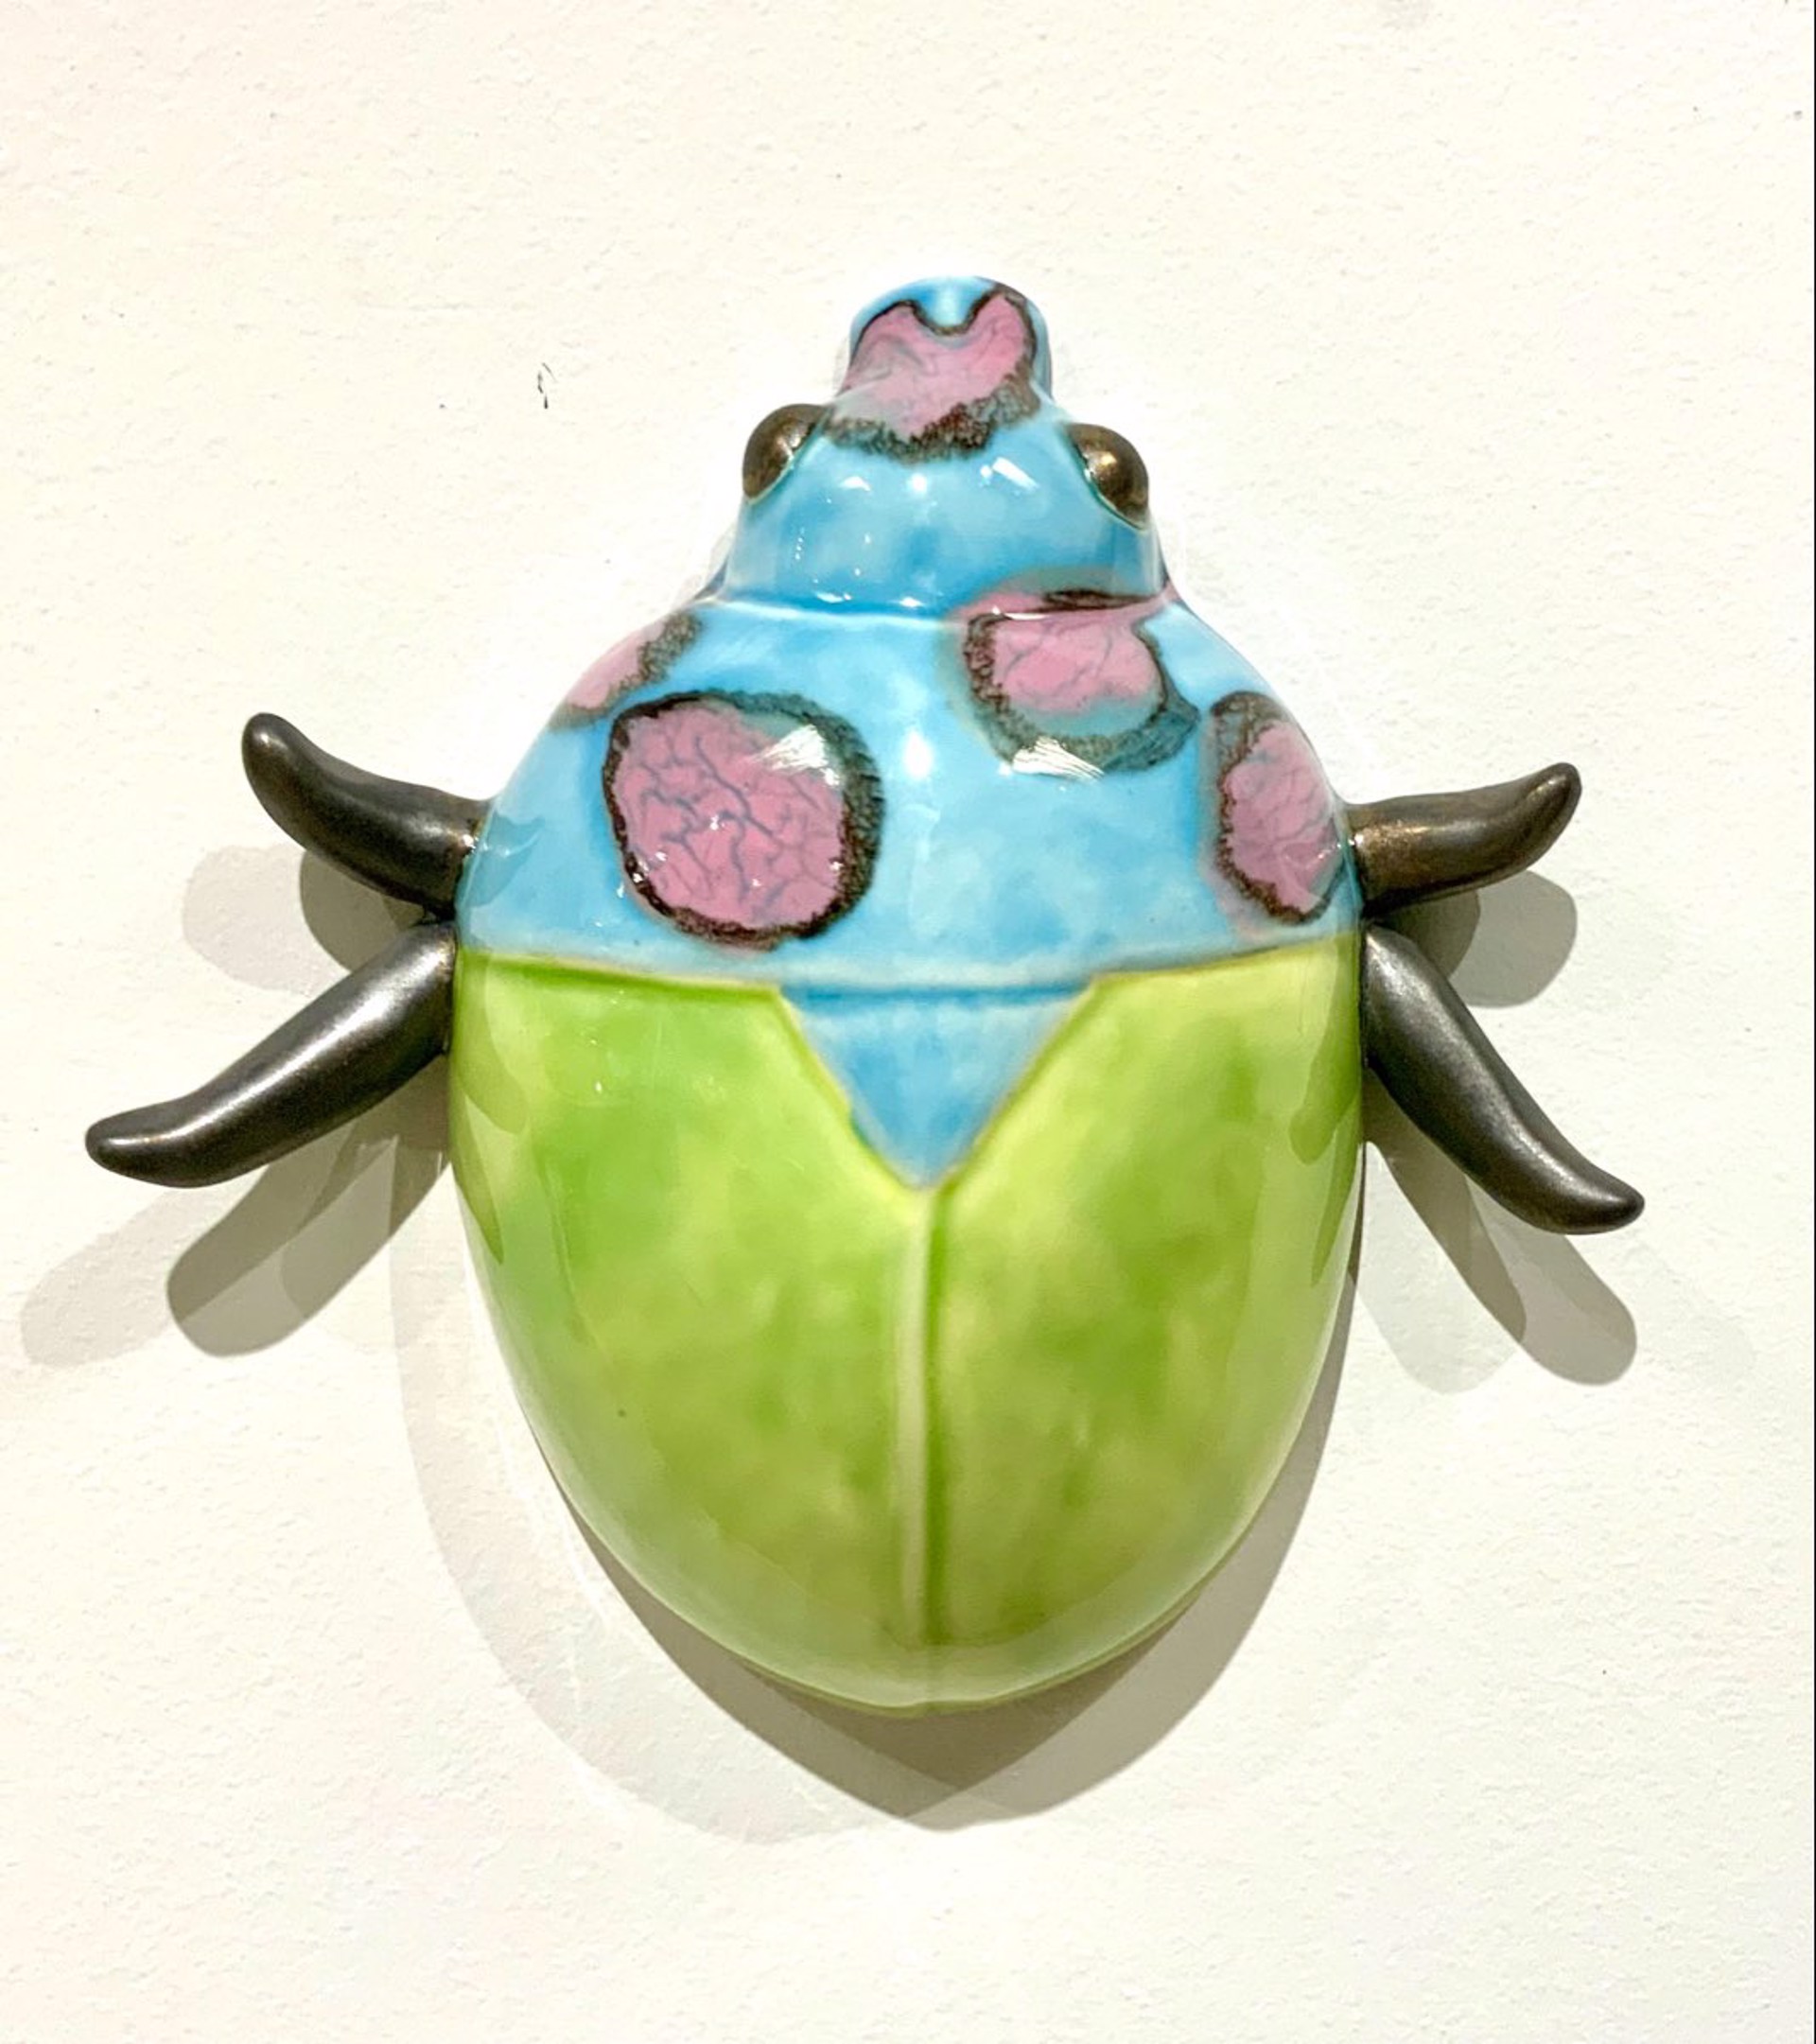 Candy Bug by Krista Grecco